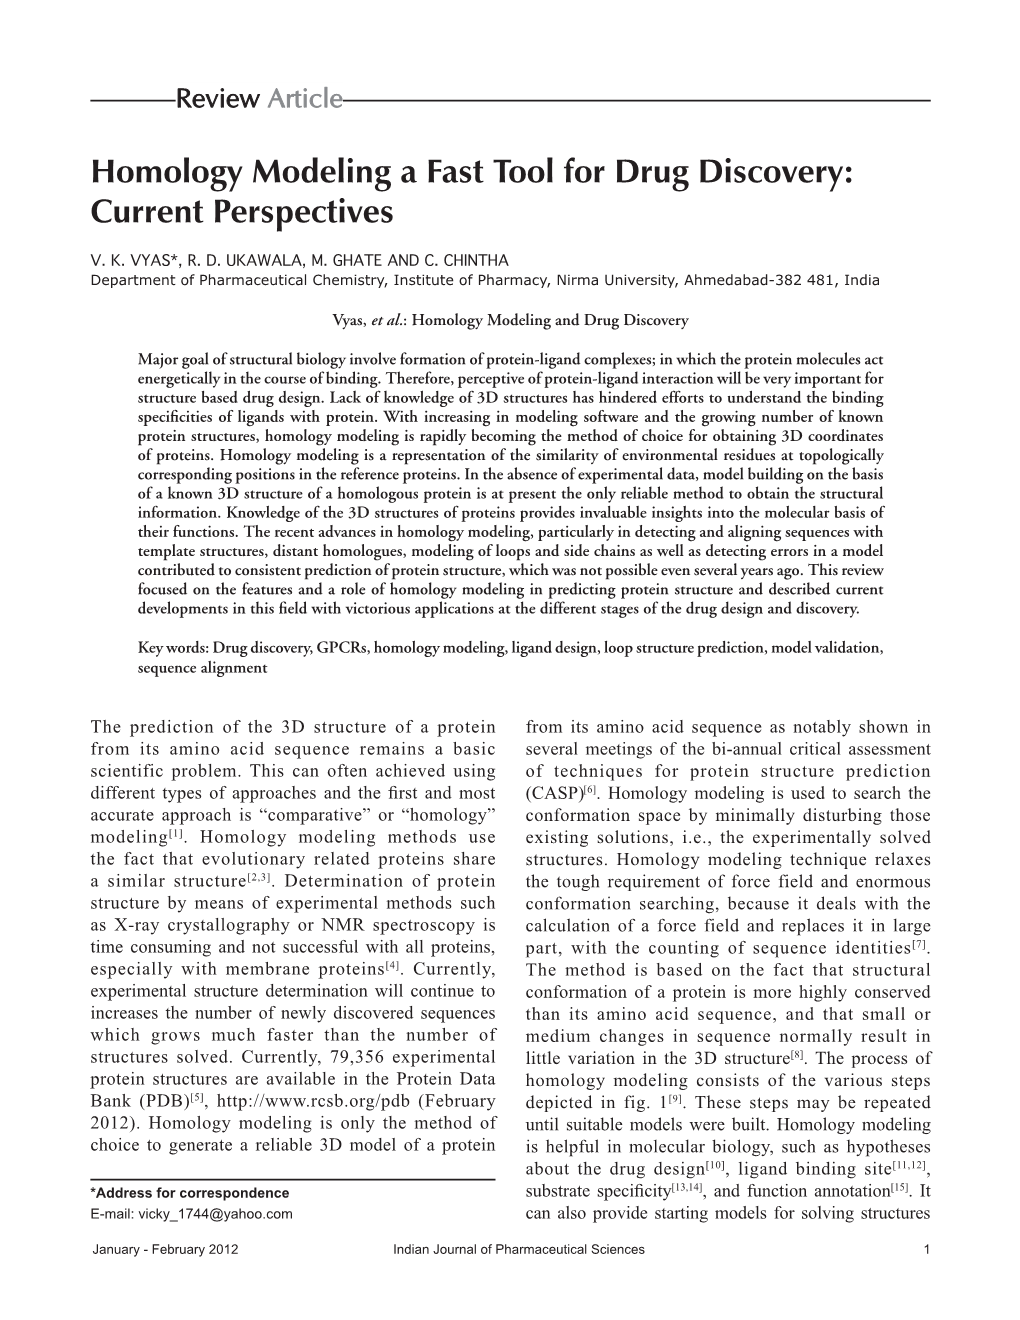 Homology Modeling a Fast Tool for Drug Discovery: Current Perspectives